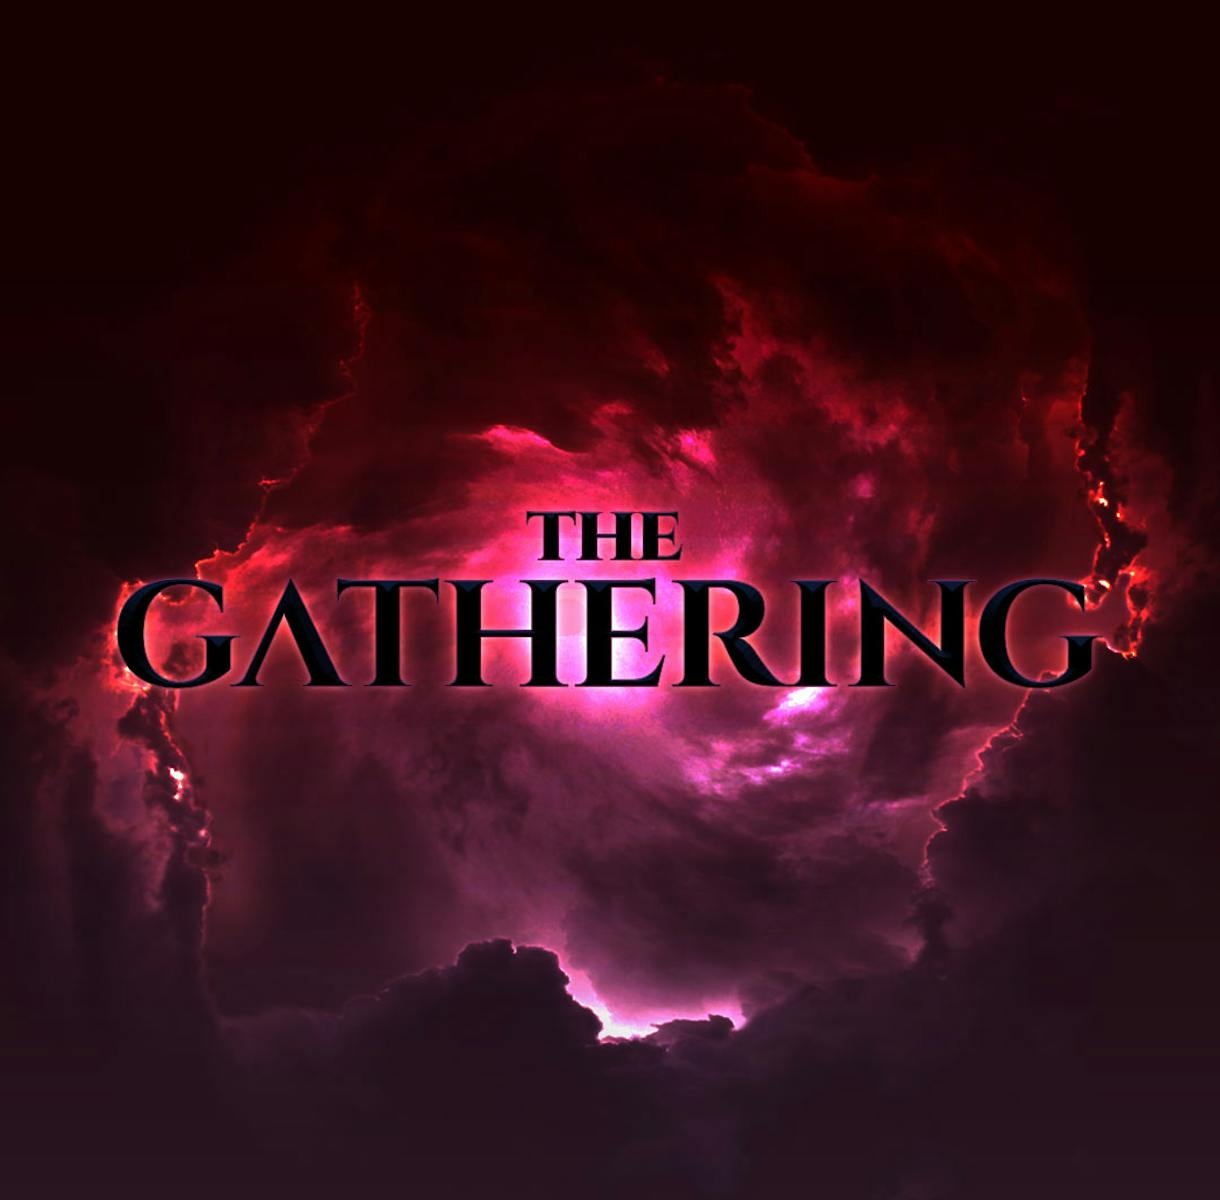 The Gathering - Friday the 13th